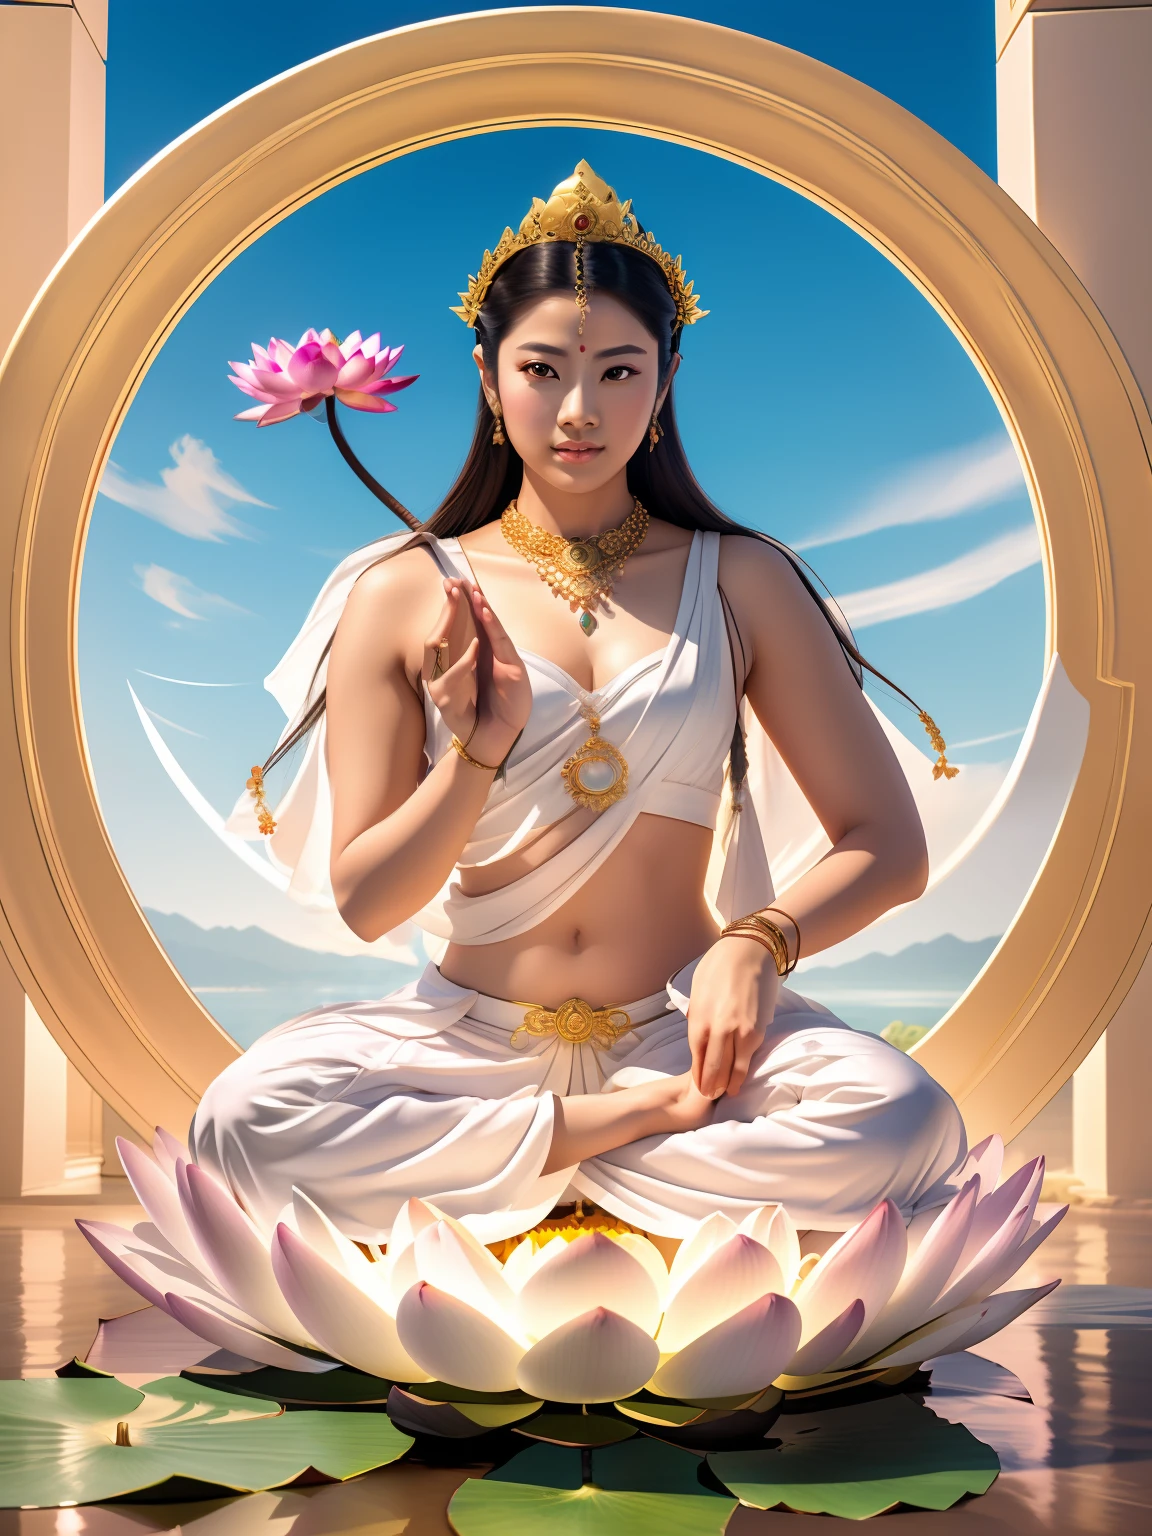 tmasterpiece,Ultra-high resolution,Buddha Mother in White,16 yaers old,Beautiful bodhisattva holding lotus flowers in his hands,((( Face the audience with the palm of your hand))),((Beautiful big eyes looking at the audience)),(healthy-looking skin， Thin skin,double eyelid,Jelly textured lips,Glowing lips,(((Flawless skin texture))),Real pores,White skin of the,ctextured skin,（Wear gemstones,pearls,hisui,amber,）,crown,choker necklace,Yingluo,jewelry,white  clothes,The head shines,Blue sky background,Flat background,Clean picture,Pure sky,Extremely high detail,Perfect Goddess,full art illustration,photorealestic,professional photoshooting,Ultra-high resolution, best qualtiy, photore, 8K,（realisticlying：1.2),A golden glow overhead（The halo：1.2),golden headdress,Brighter,tmasterpiece,best qualtiy,Complicated details，Light environment and crystals in the background,crystal,Portal of the future,3D light,k hd,magie,God of Light,The light from the back window is backlighted,Detailed face,depth of fields,Gentle lighting,Tone-mapping,highly  detailed,concept-art,Smoothness,Clear focus,Dramatic lighting,highly detailed art,cinematic ligh,8K,amazing shadows（highly detailed back ground：1.2）The woman sitting on the lotus holds a lotus flower,（（Pink lotus））,Guanyin, an ancient Chinese goddess, guanyin of the southern seas, Sit gracefully on a lotus, gilded lotus princess, Pink lotus Queen, contented female bodhisattva, inspired by Lü Ji, Realiy, sitting on a lotus flower, lotus，3Drenderingof